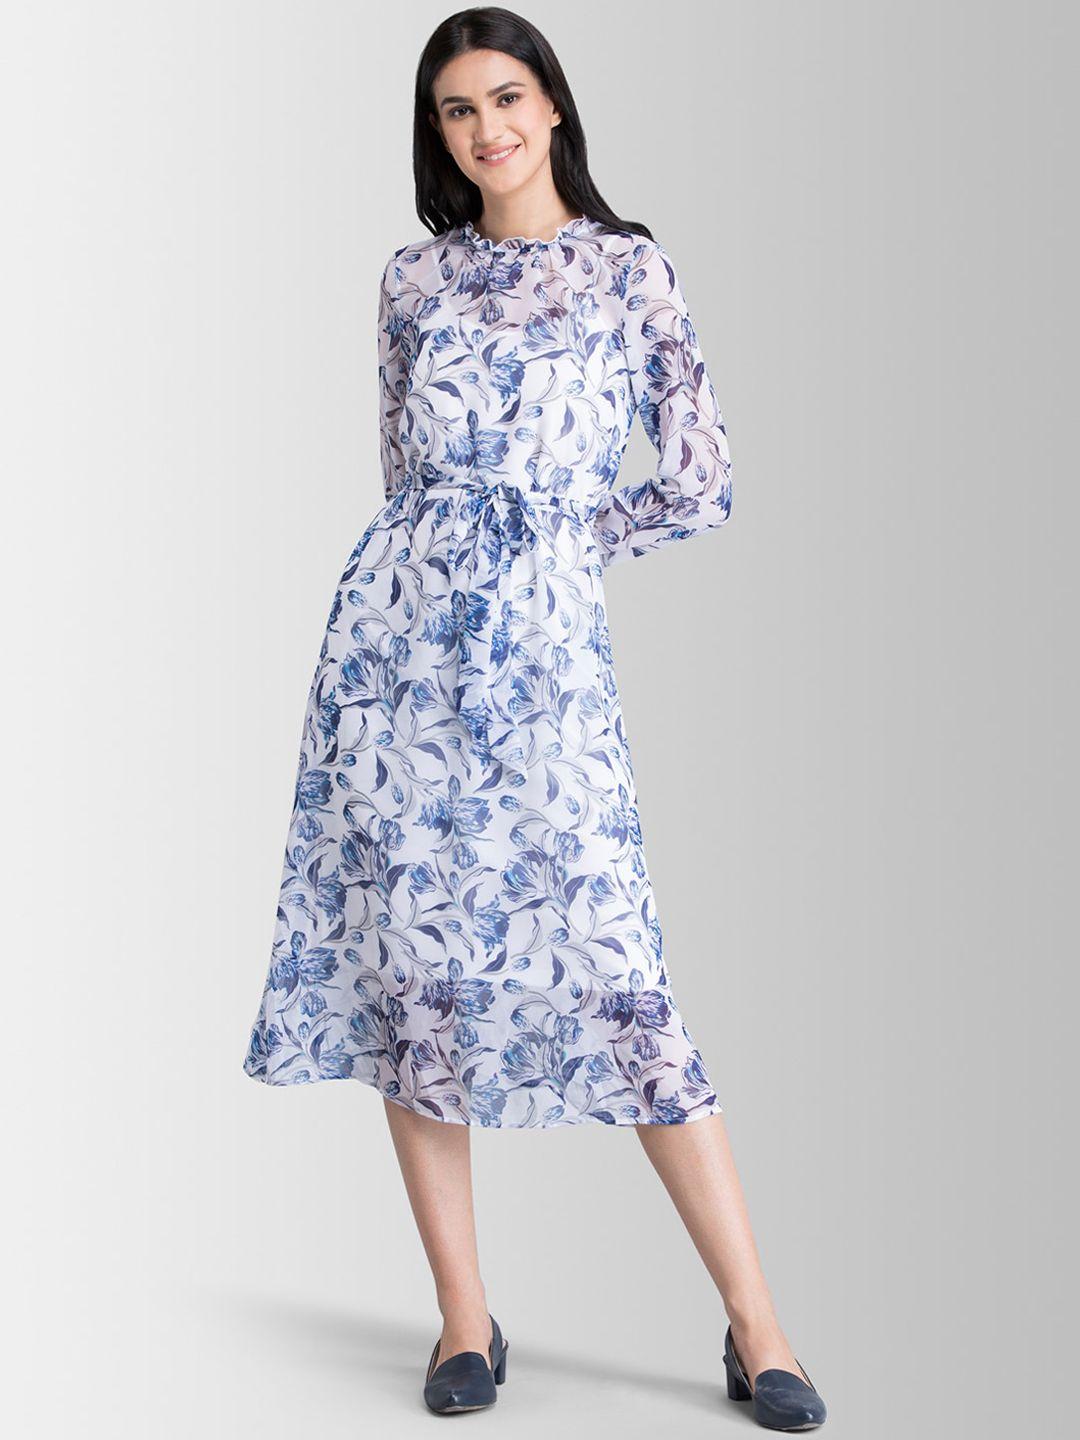 fablestreet women white & blue floral printed fit and flare dress